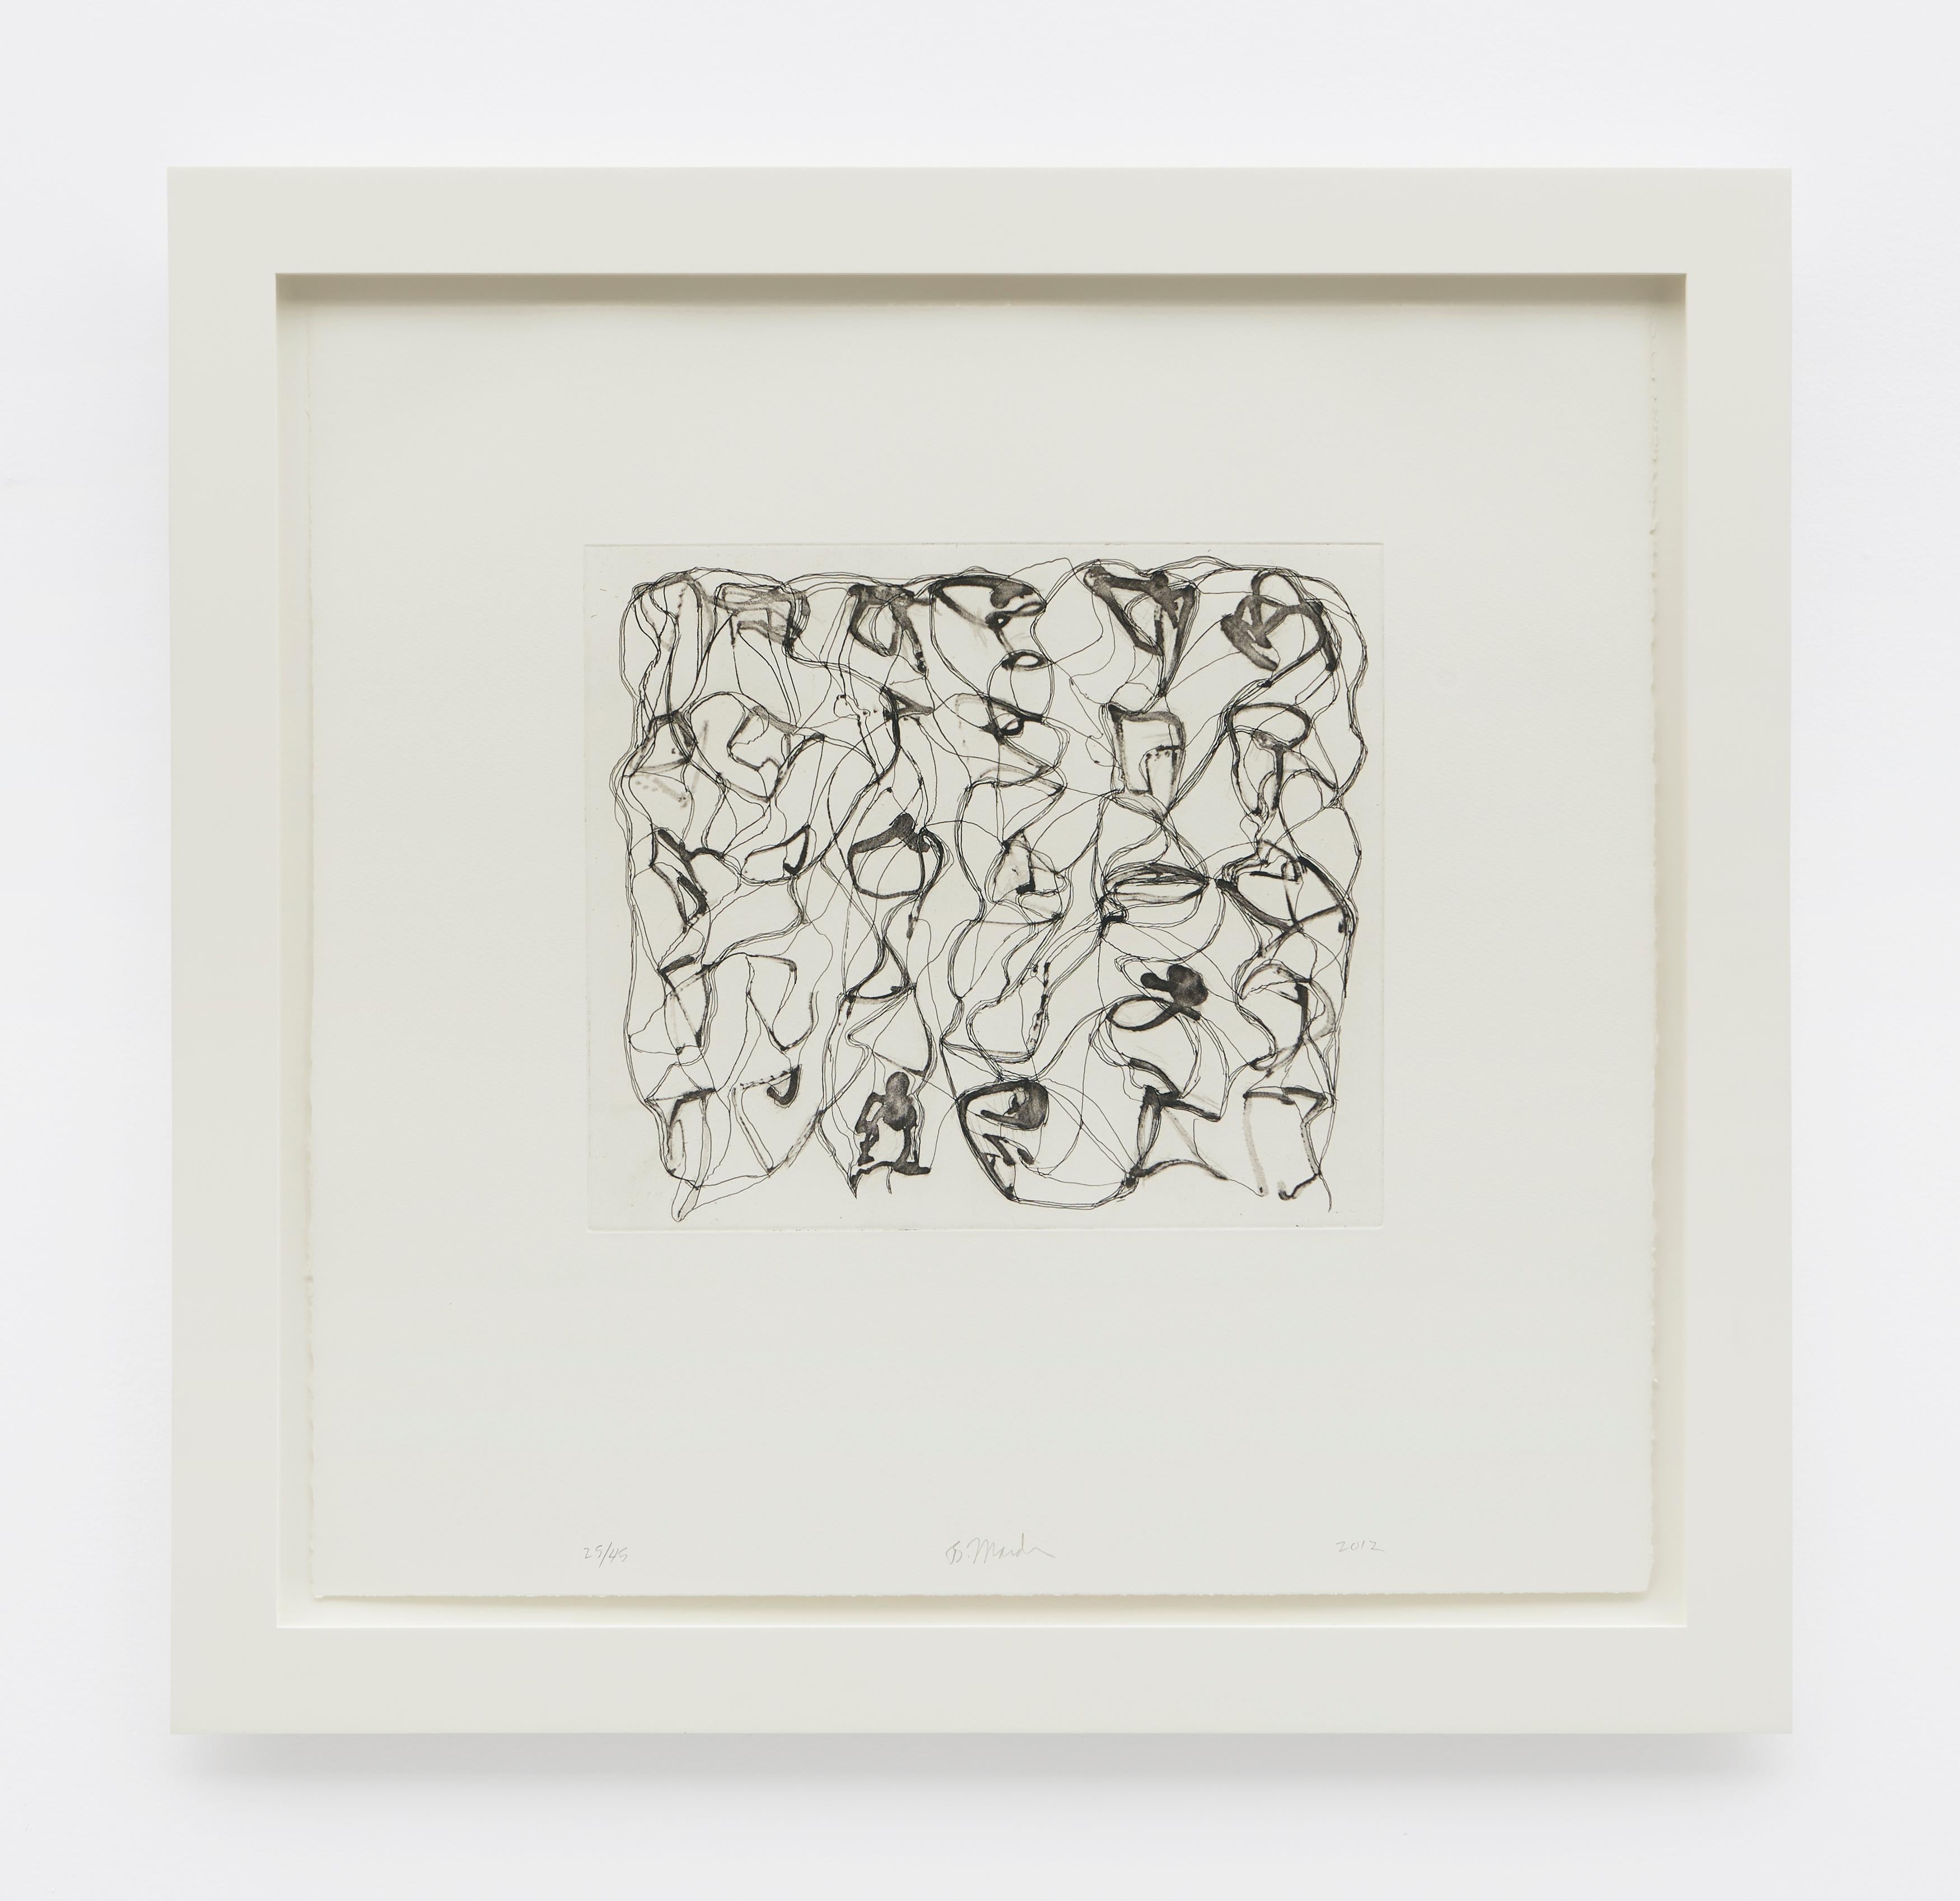 #8 - Contemporary Print by Brice Marden